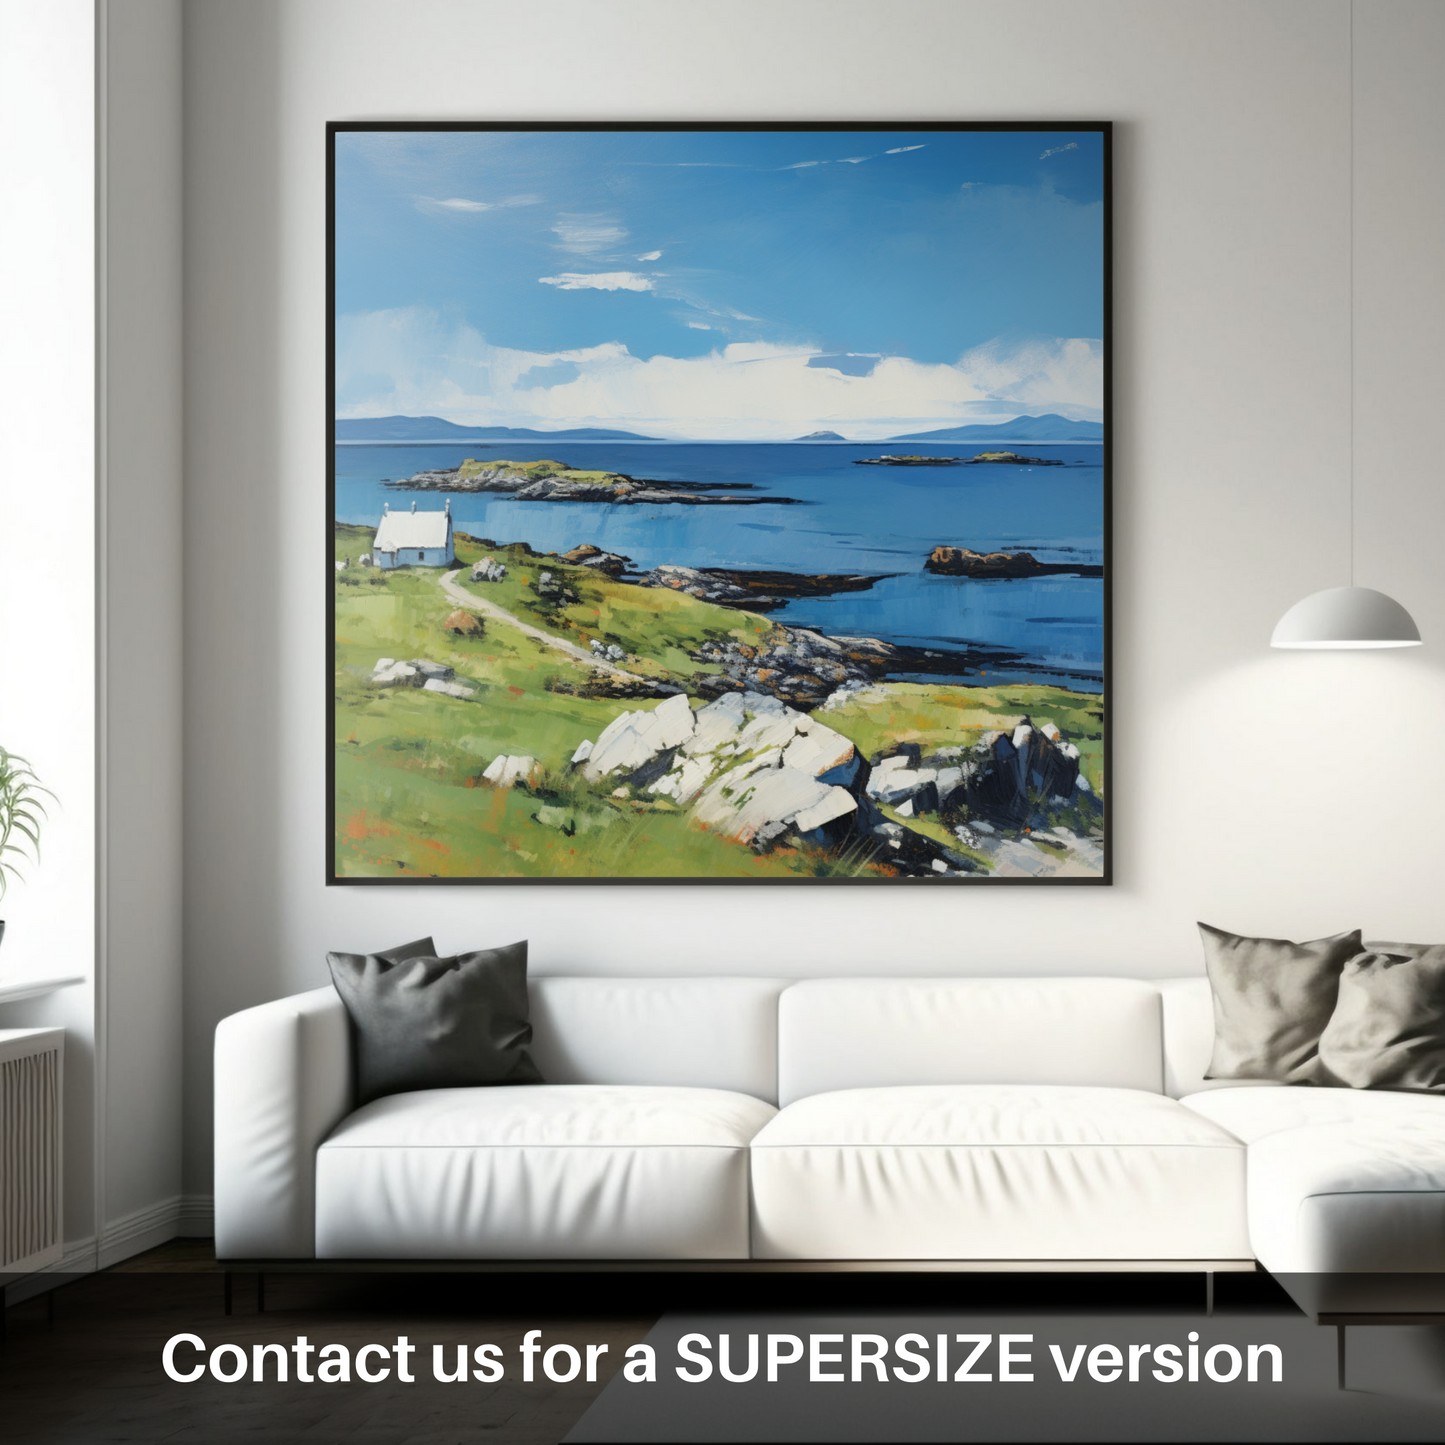 Huge supersize print of Isle of Scalpay, Outer Hebrides in summer